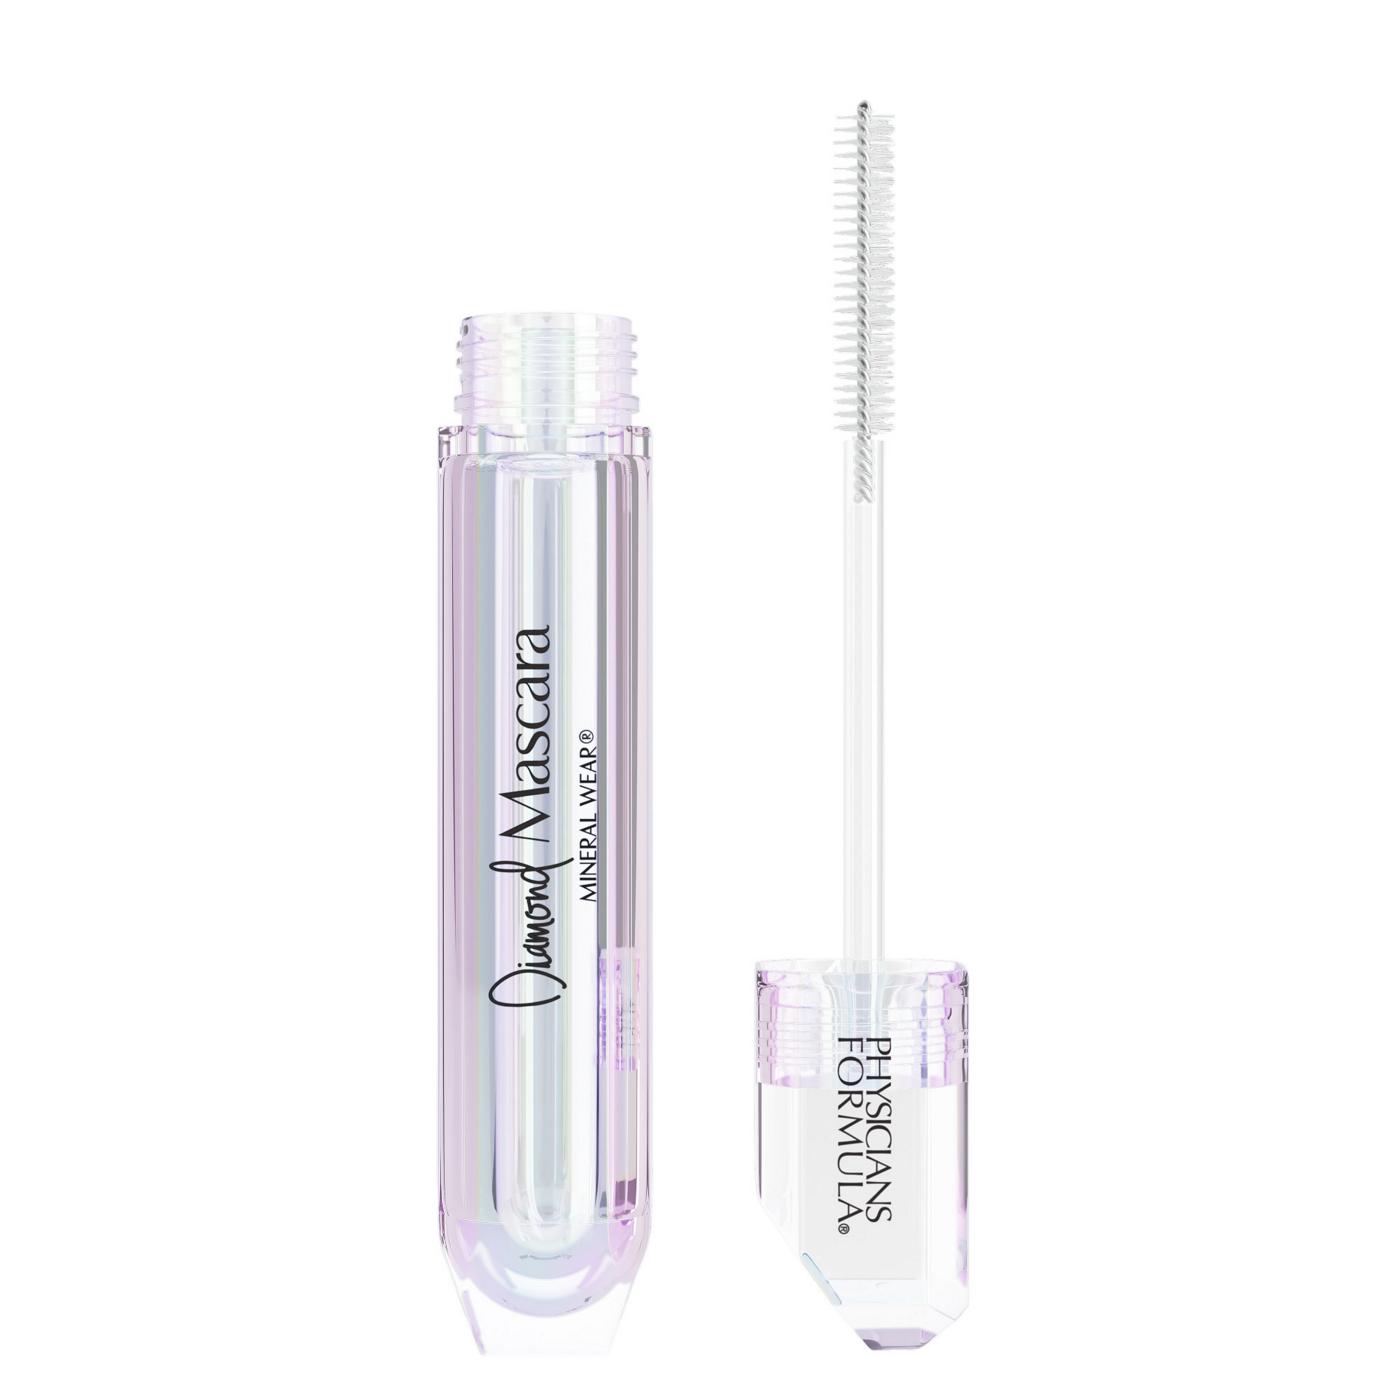 Physicians Formula Diamond Mascara Mineral Wear Clear; image 2 of 3